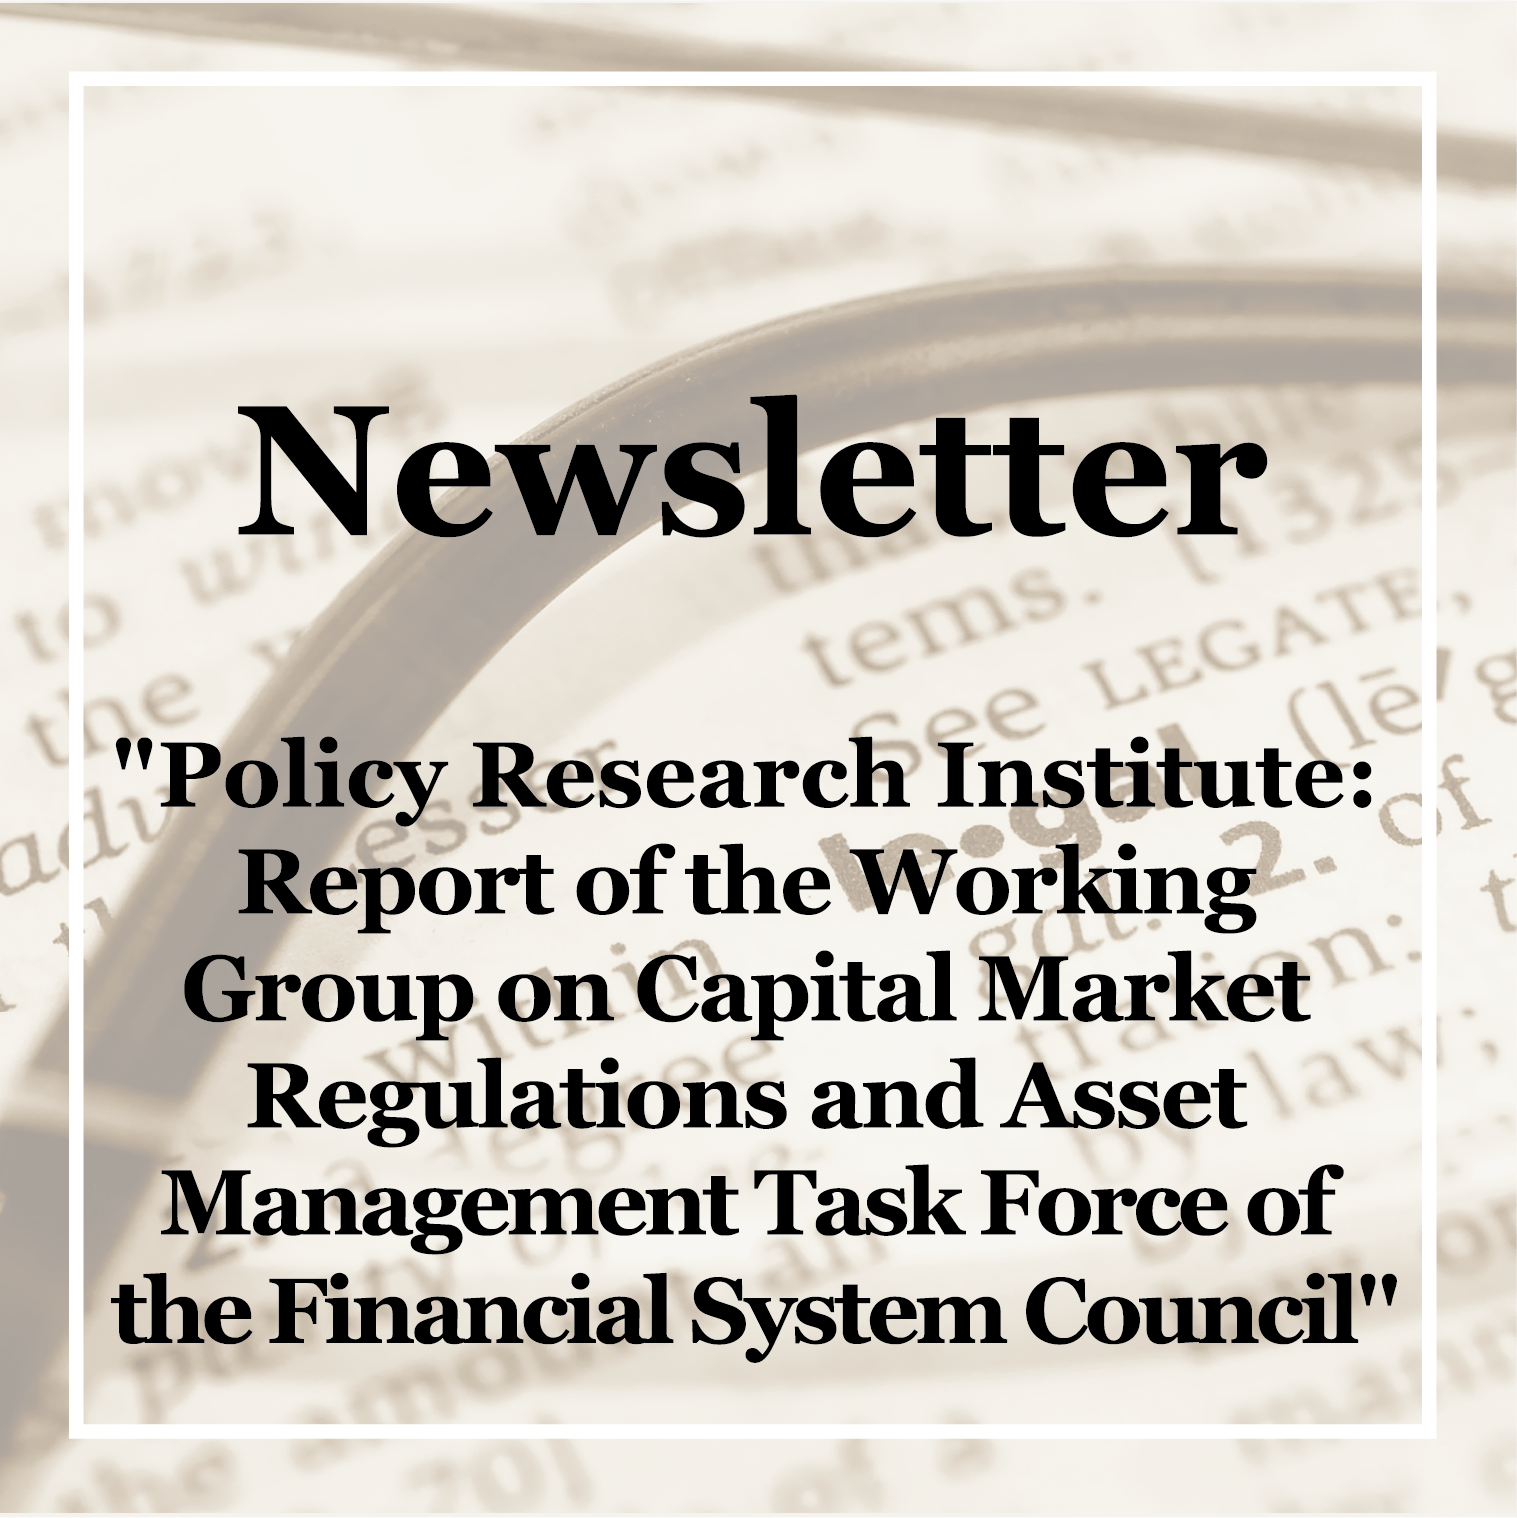 [Newsletter] Policy Research Institute: "Report of the Working Group on Capital Market Regulations and Asset Management Task Force of the Financial System Council"